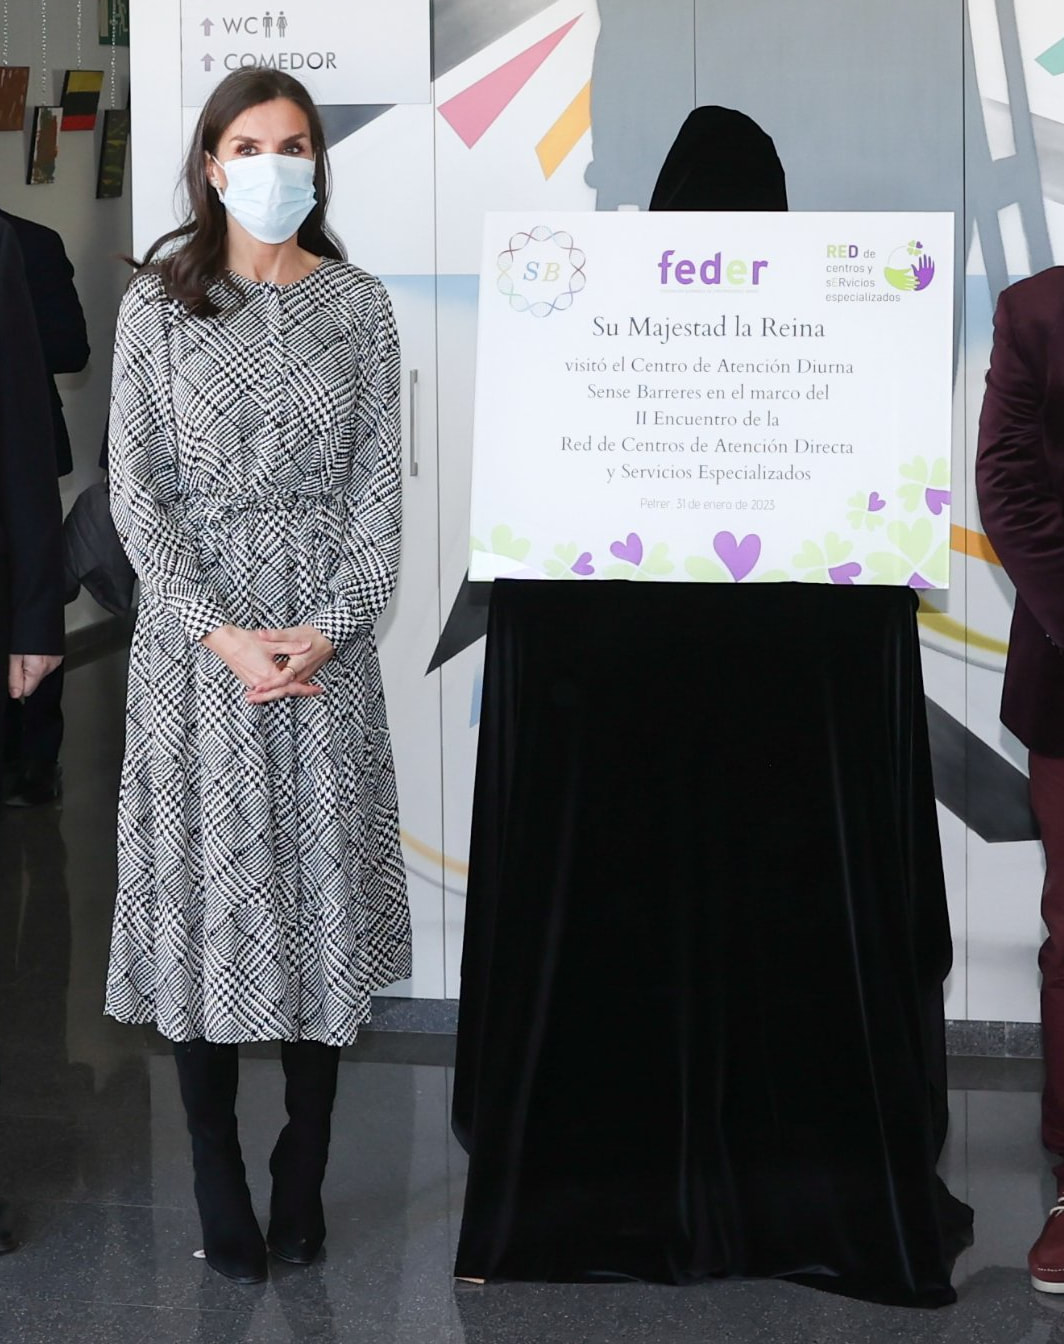 Queen Letizia chaired the II National Meeting of the Network of Direct Care Centers and Specialized Services of the Spanish Federation for Rare Diseases (FEDER) at the Sense Barreres center in Petrer on 31 January 2023